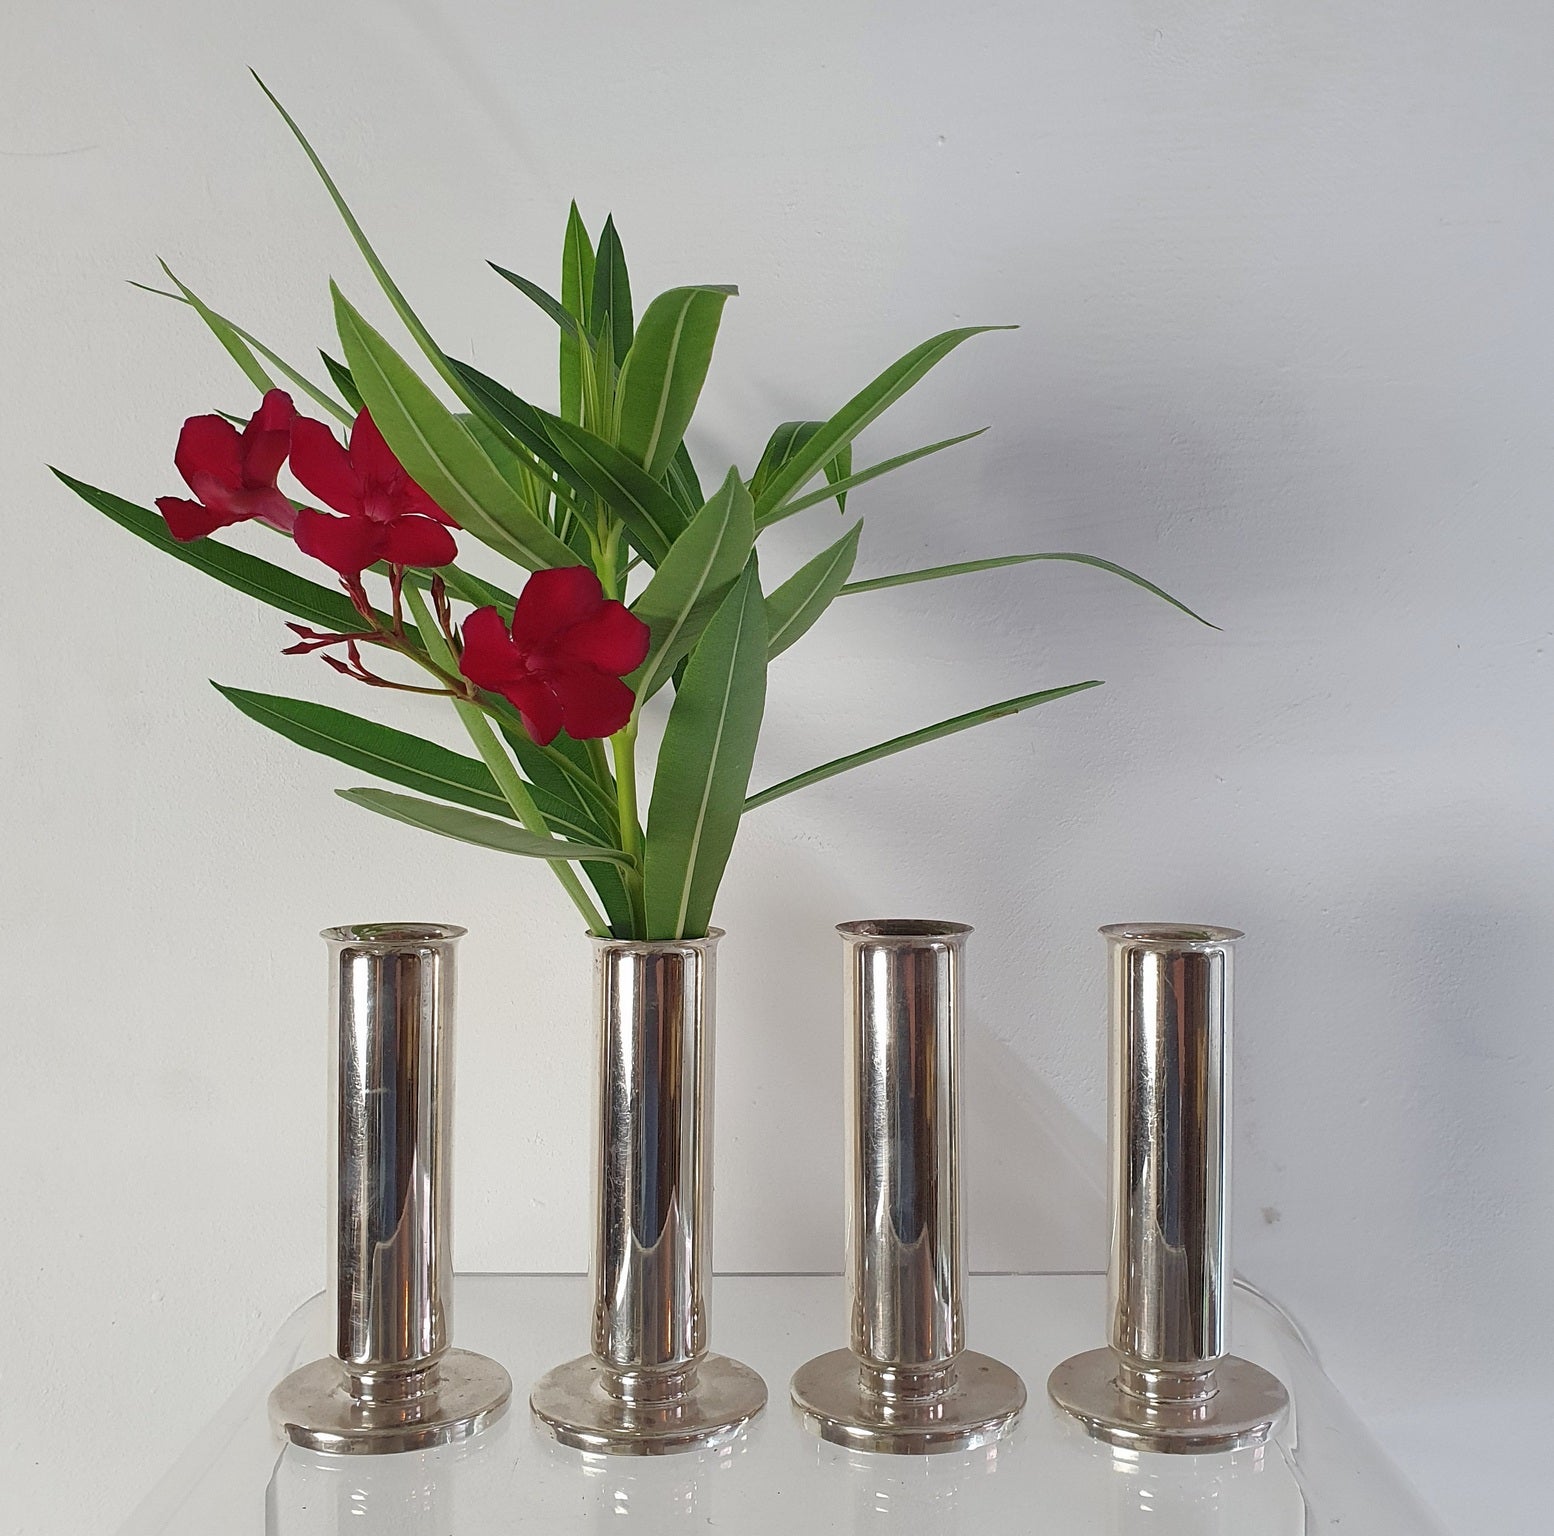 Soliflore Vases by Gio Ponti for Krupp Milano, 1930's